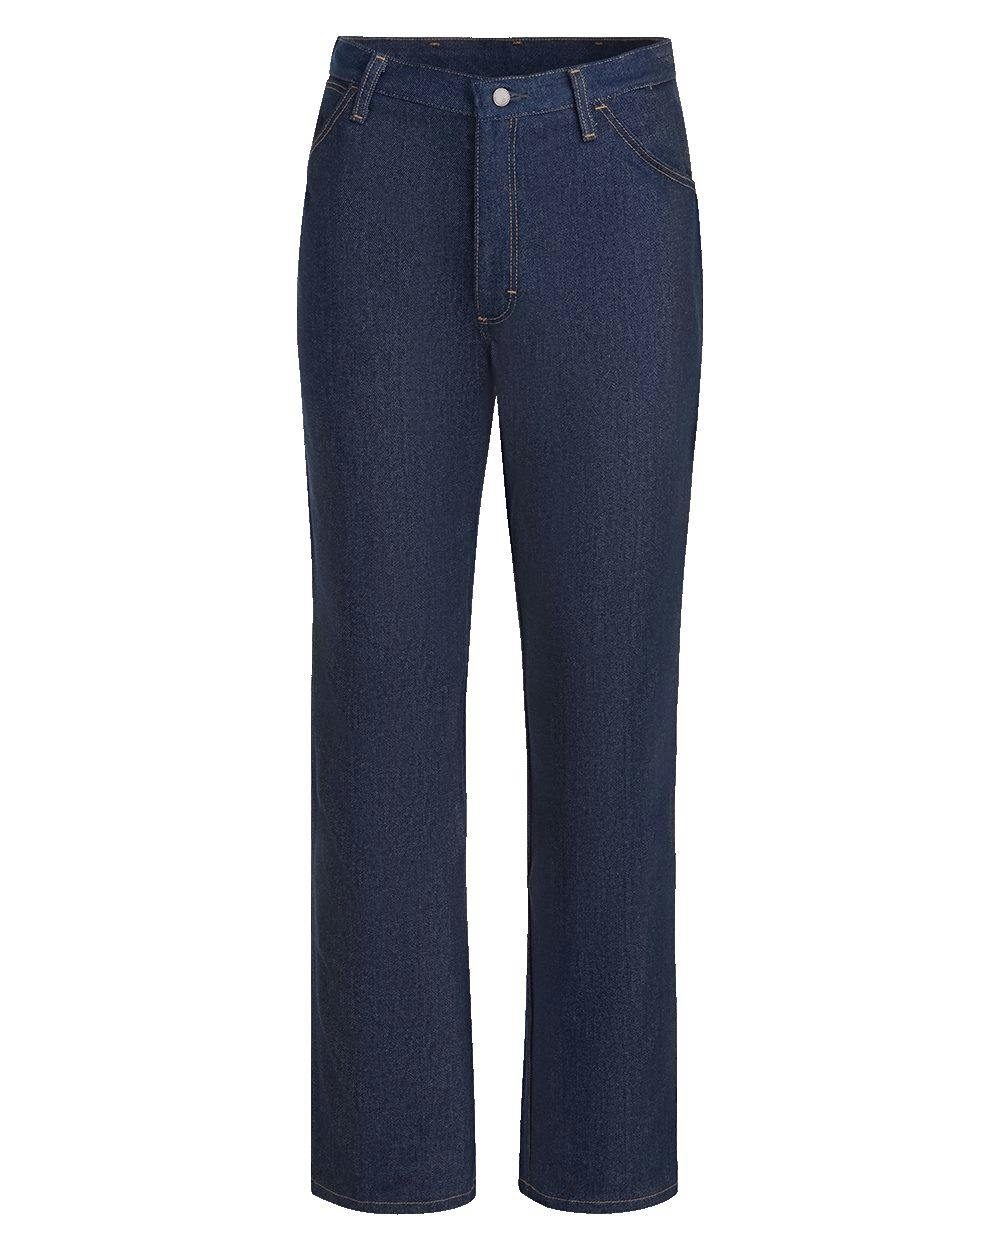 Image for Flame Resistant Jean-Style Pants - PEJ2